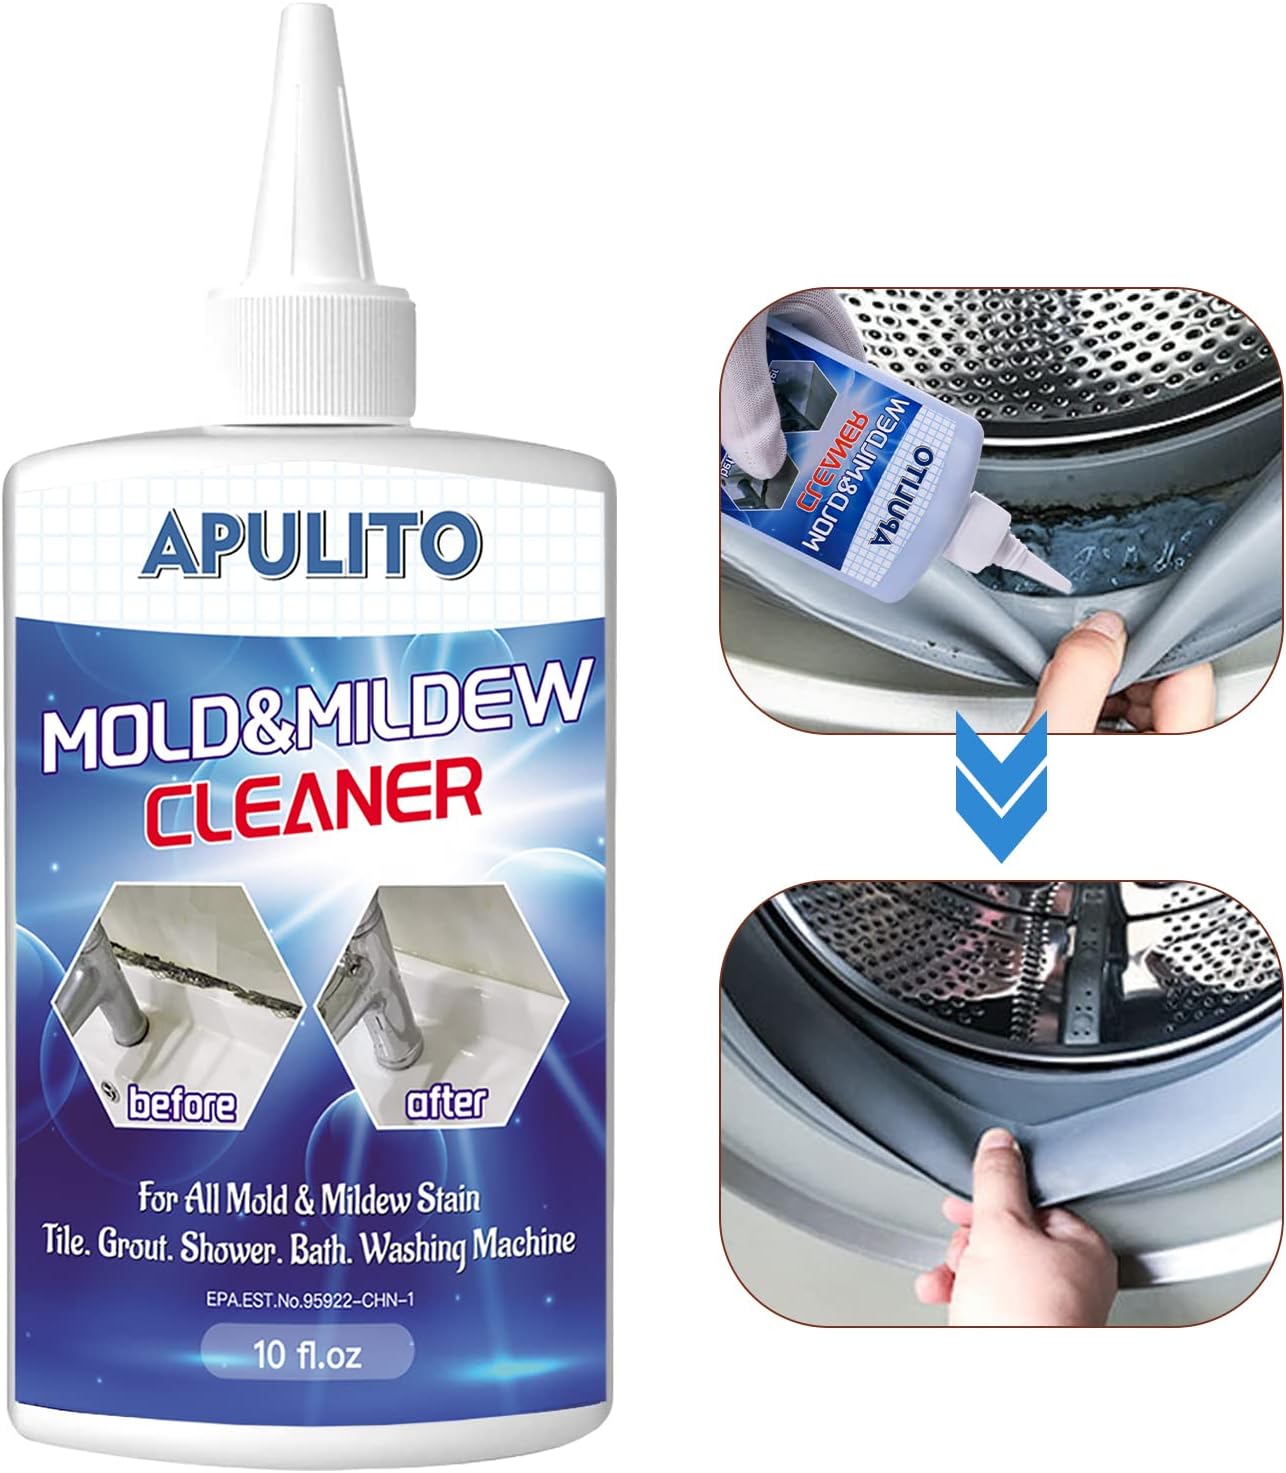 This product is a very easy and the most effective item. I have used my washing machine behind small hard to reach gasket area, which it had a lot mildew growing. I apply the area the first and run the Landry machine. The mildew did not came out all of them the first, after I tried three or four time, it came out all clean. I apply the product the first time, after the many run the machine times, I did not apply it, but it worked. Due to did not came out the first time, the mildew was very band 